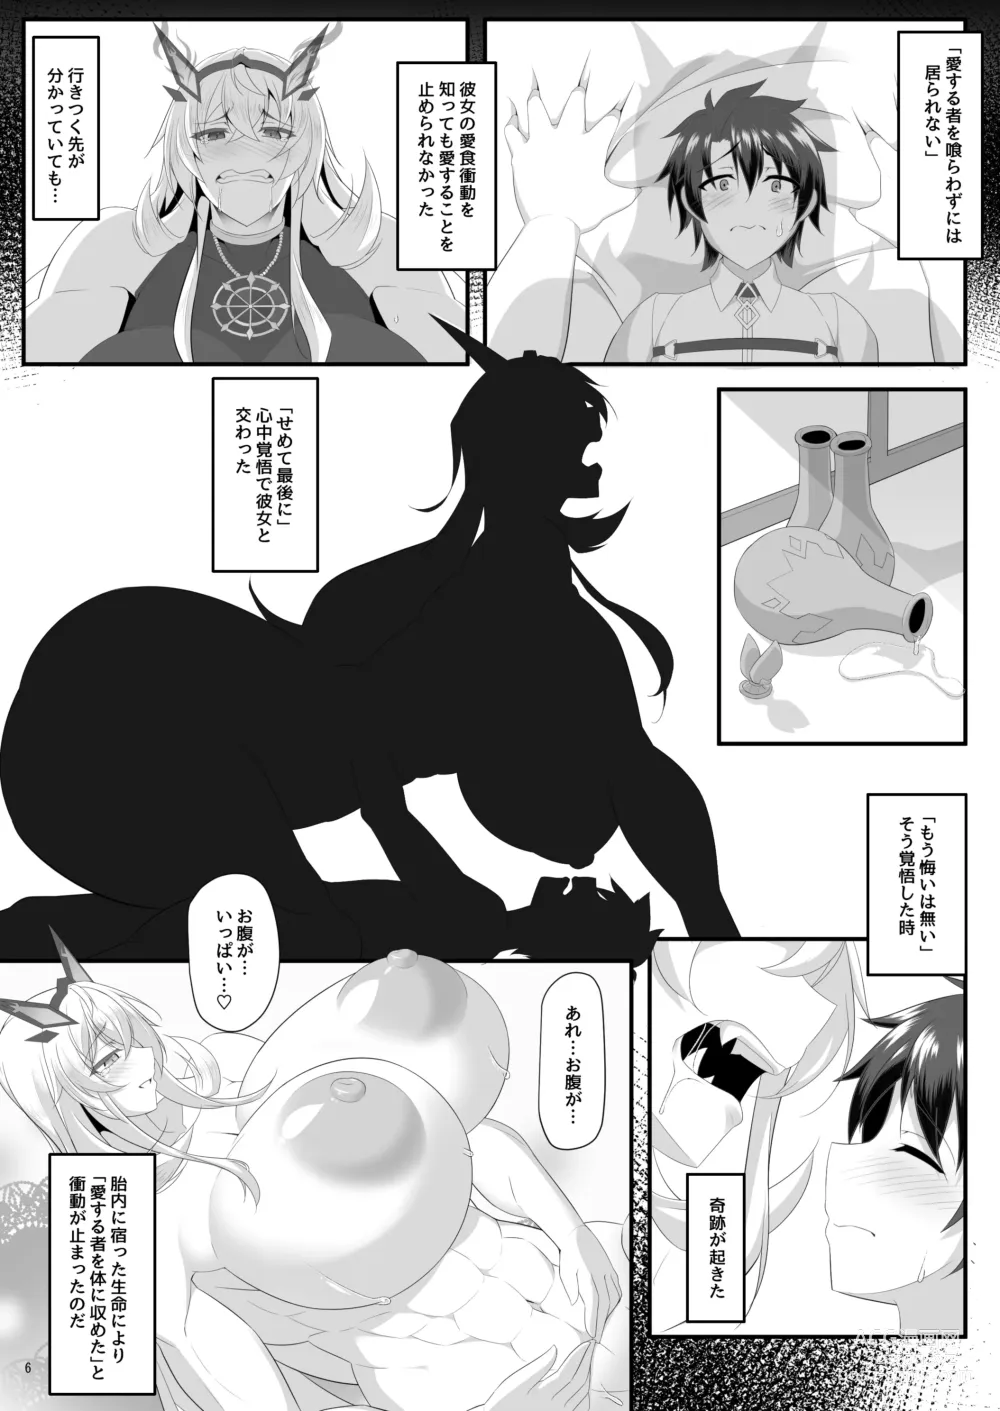 Page 6 of doujinshi barghest BREAST